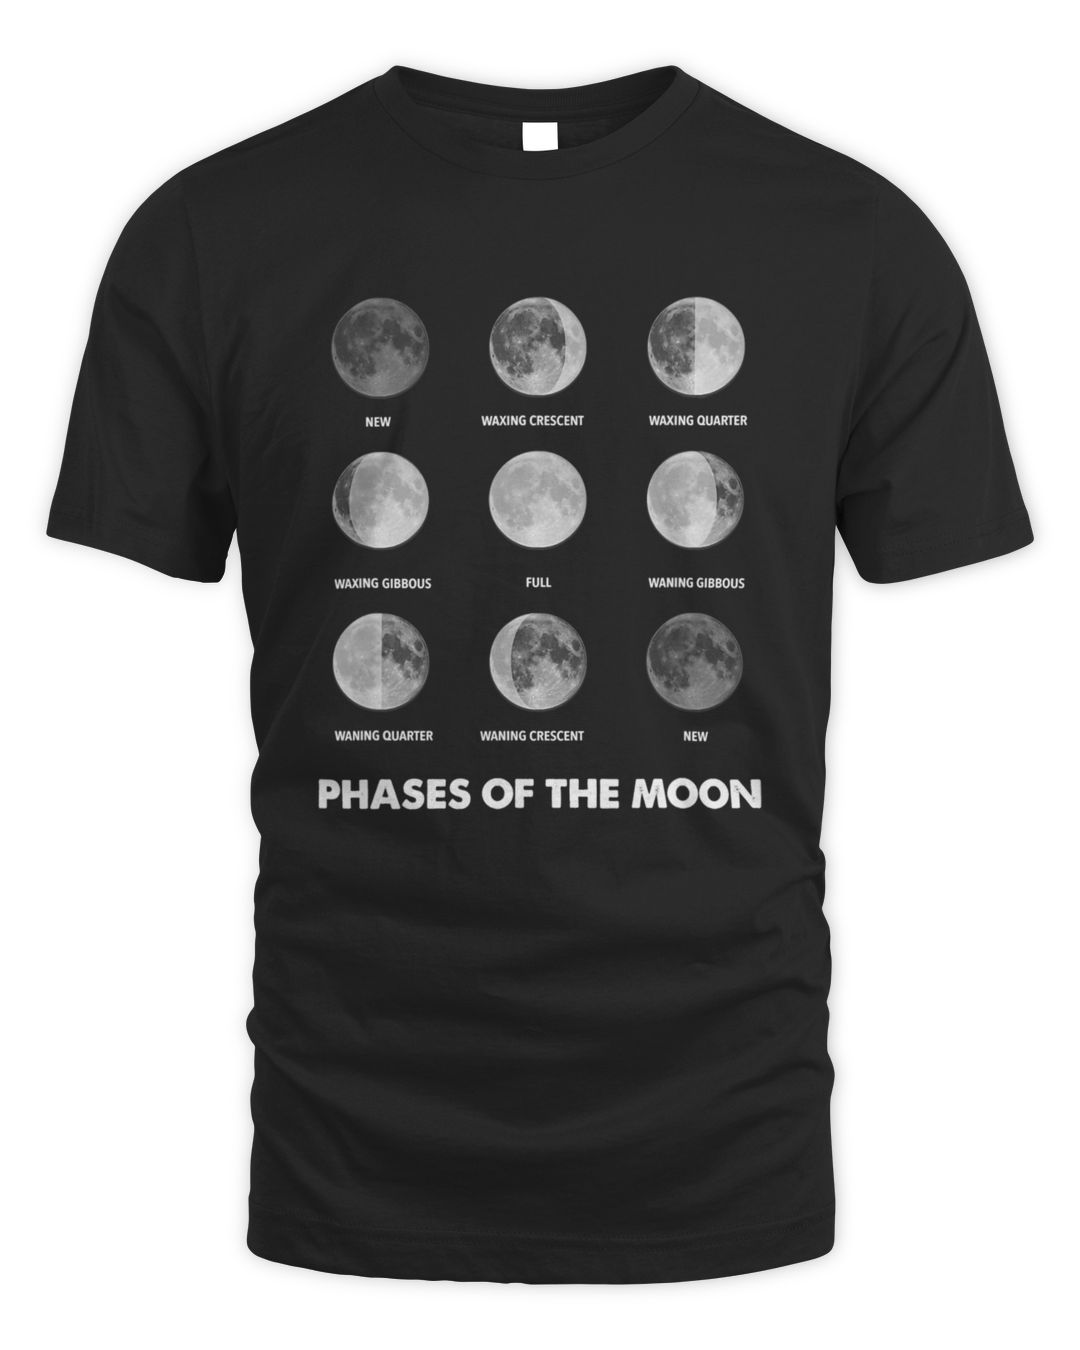 Moon Phases - Moon Cycle - Lunar Cycle - Lunar Eclipse T-Shirt | Ducon